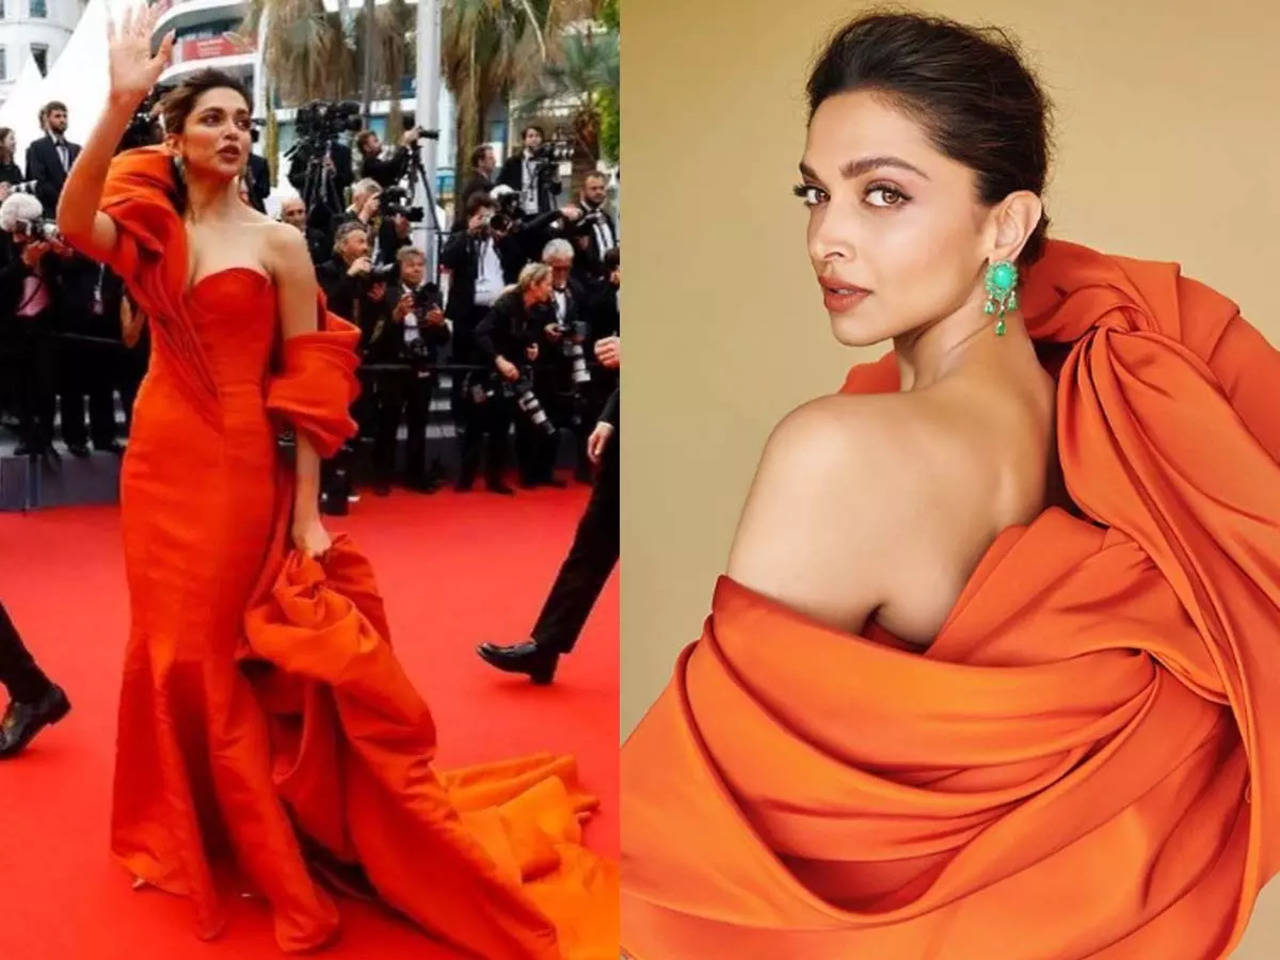 Throwback to the best red carpet looks of our Bollywood Divas at the Cannes  Film Festival